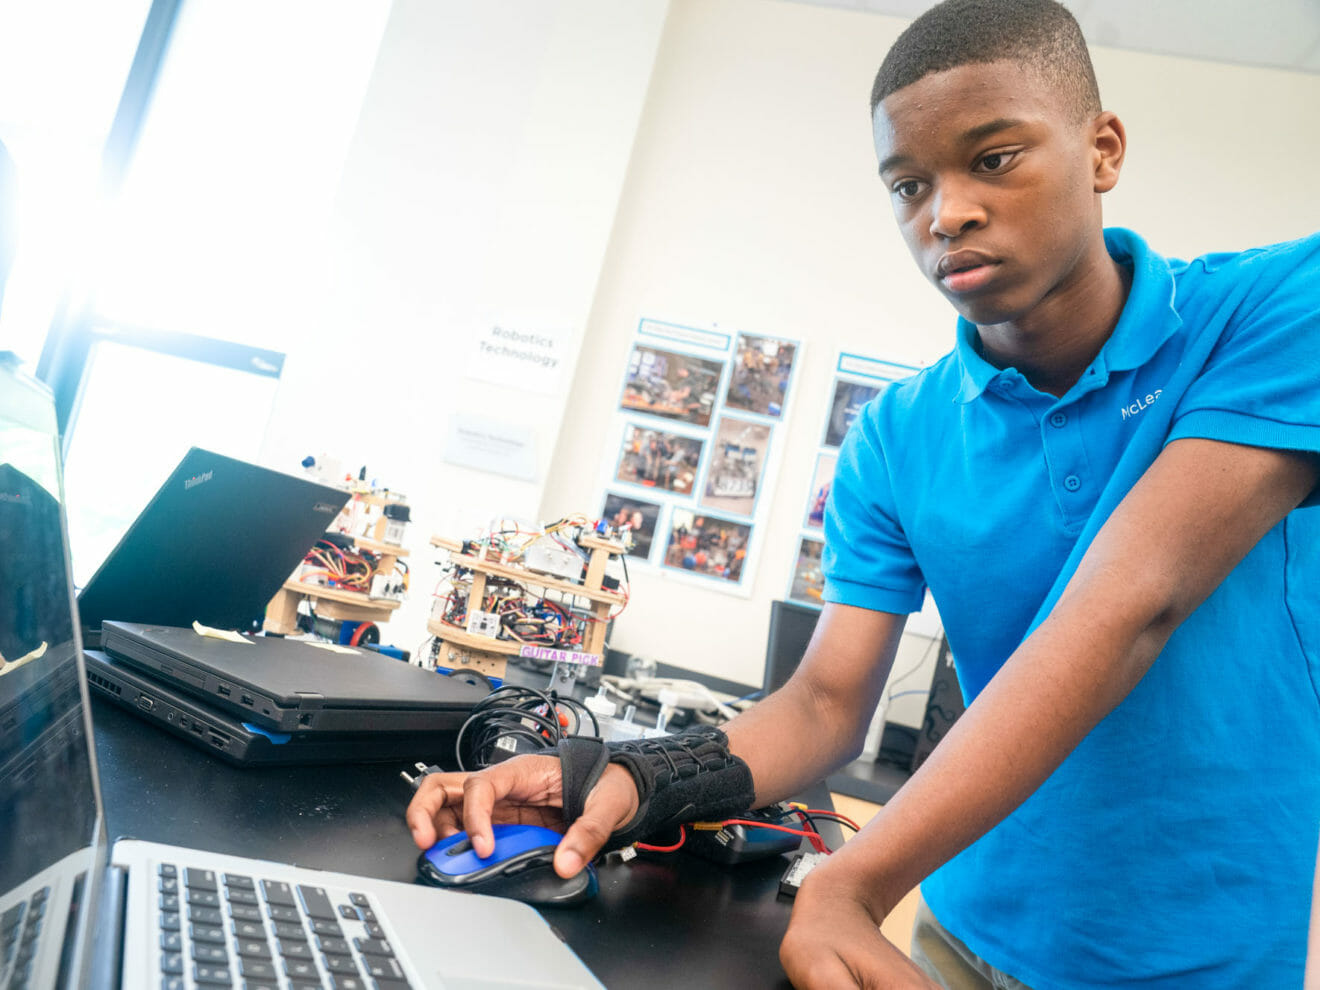 Student uses laptop during robotics project